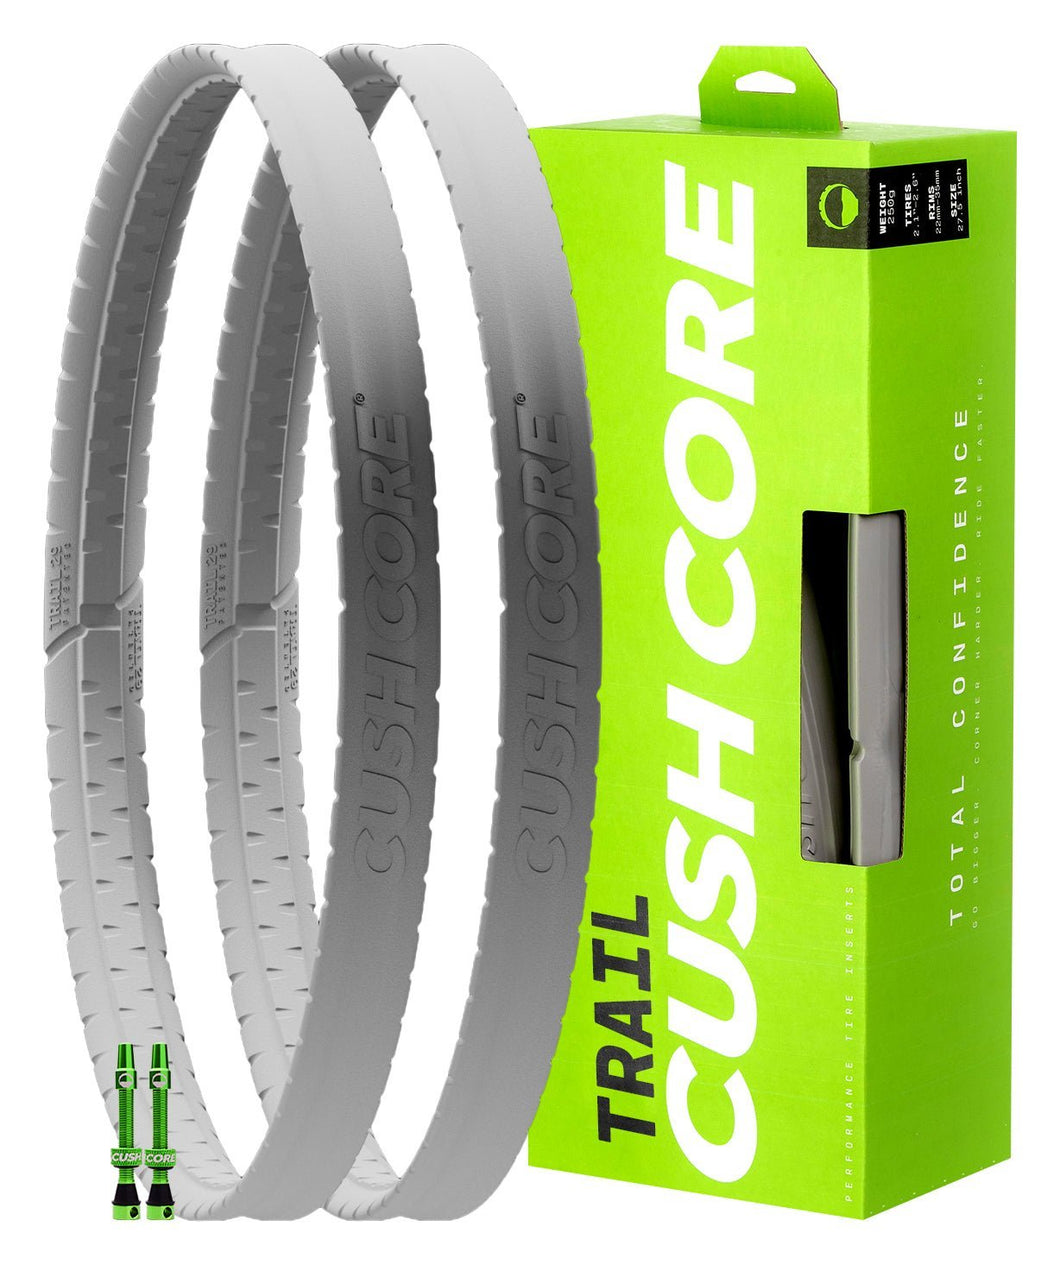 CushCore Trail Tire Insert - Pair Mixed Set (27.5/29) - The Lost Co. - CushCore - 60026 - 850048765122 - -